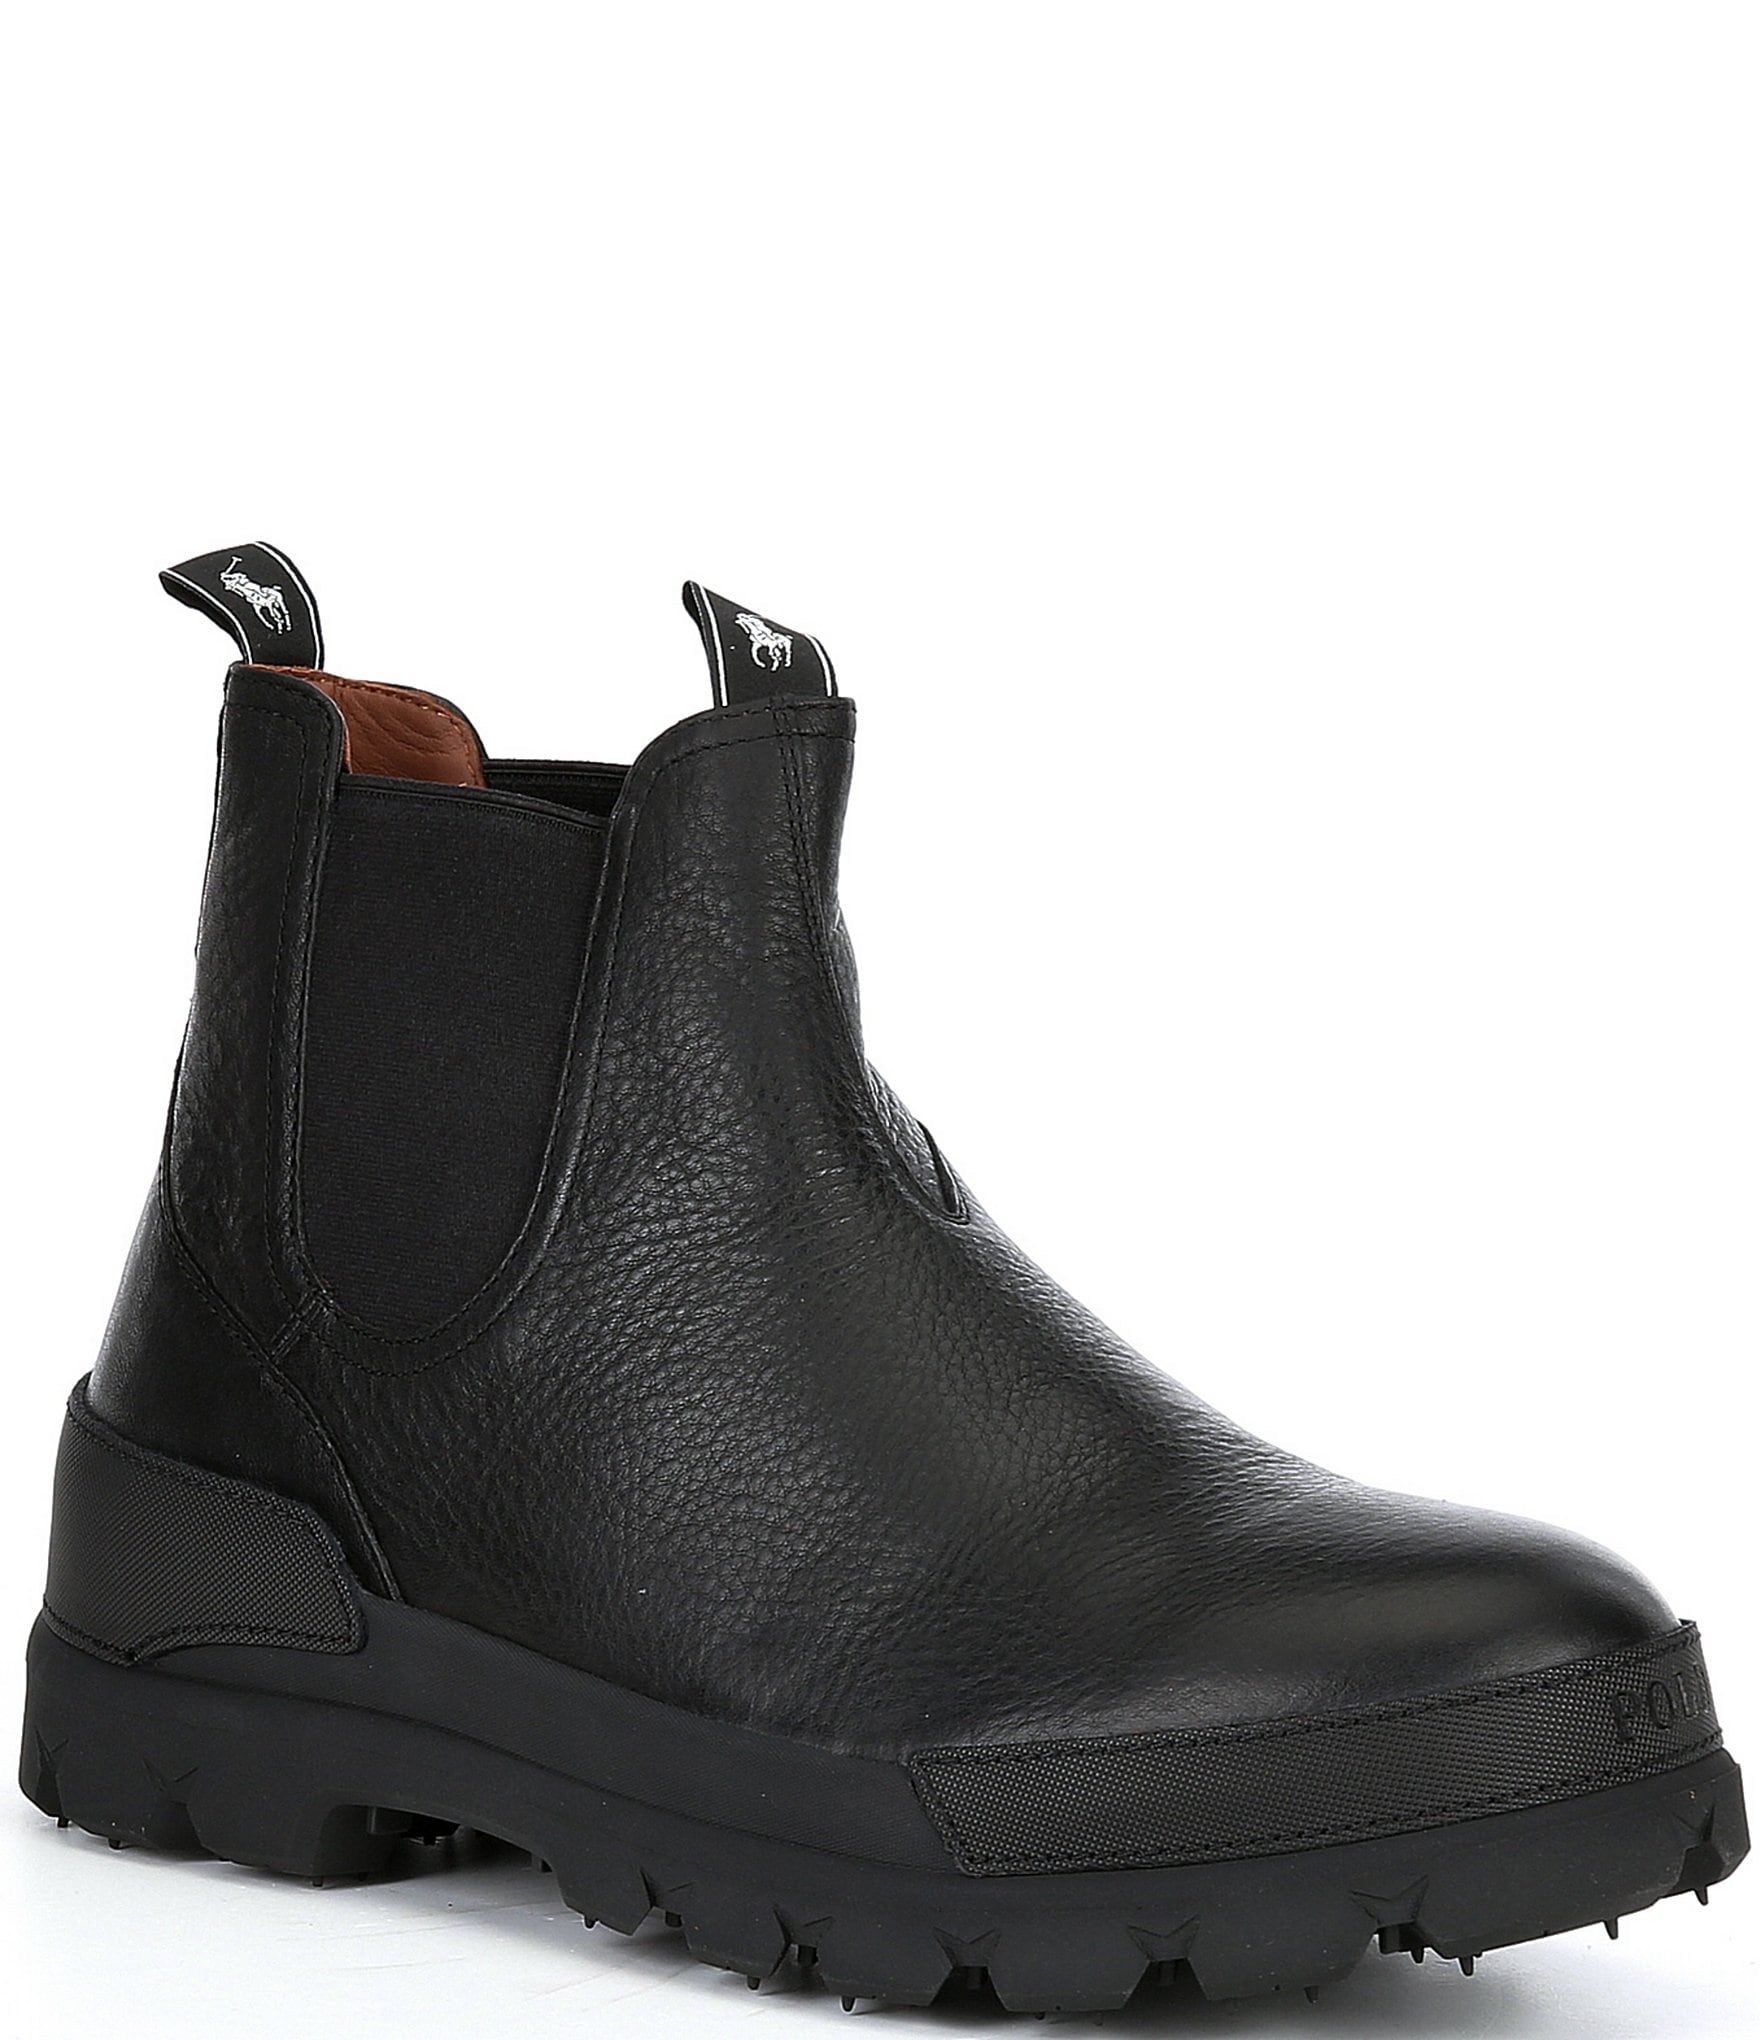 Black Woven Leather Chelsea Boots for Men by